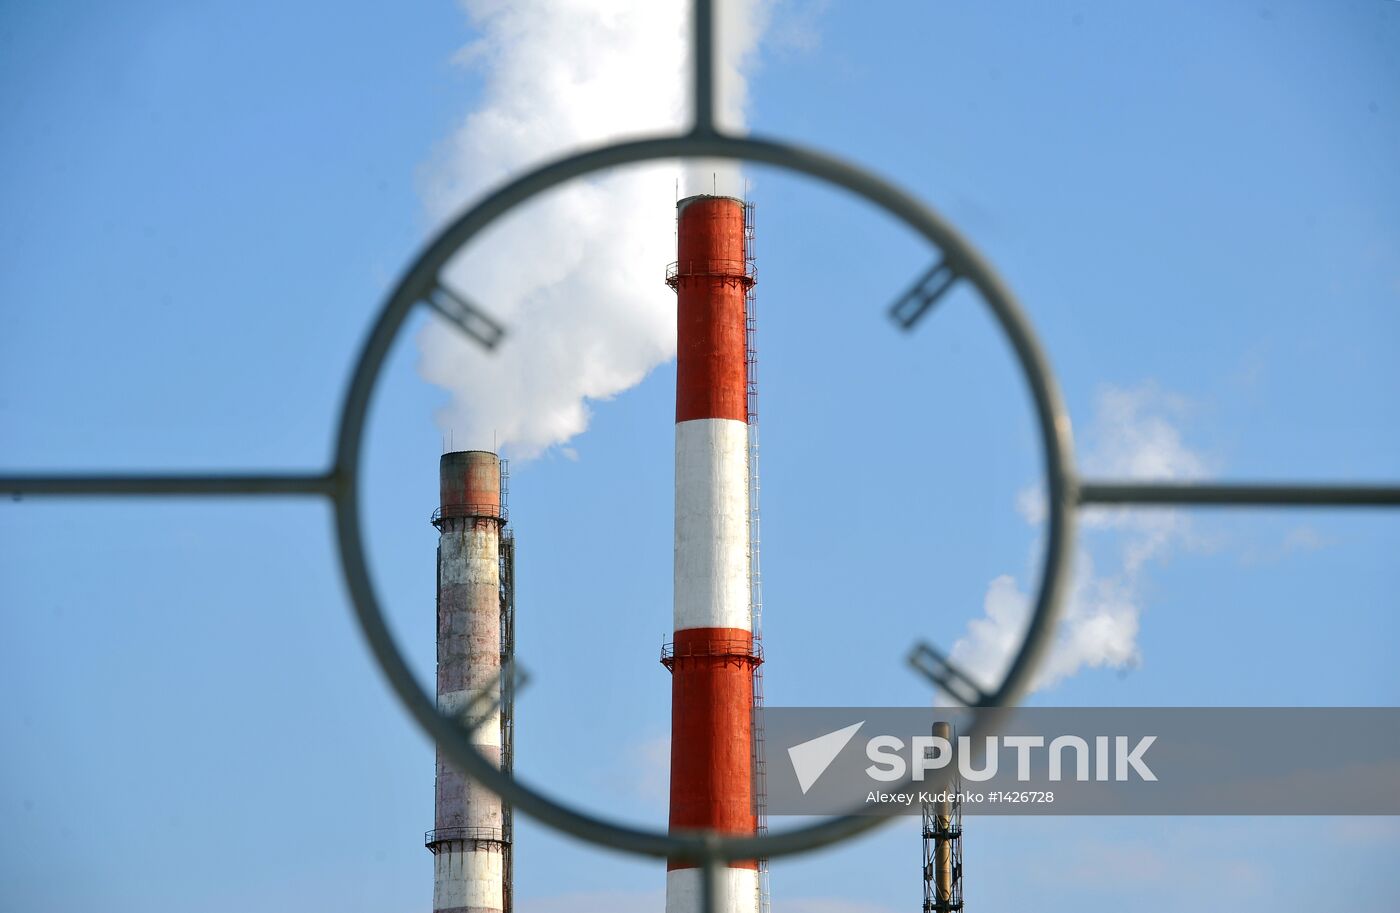 Baikalsk Pulp and Paper Mill to be closed